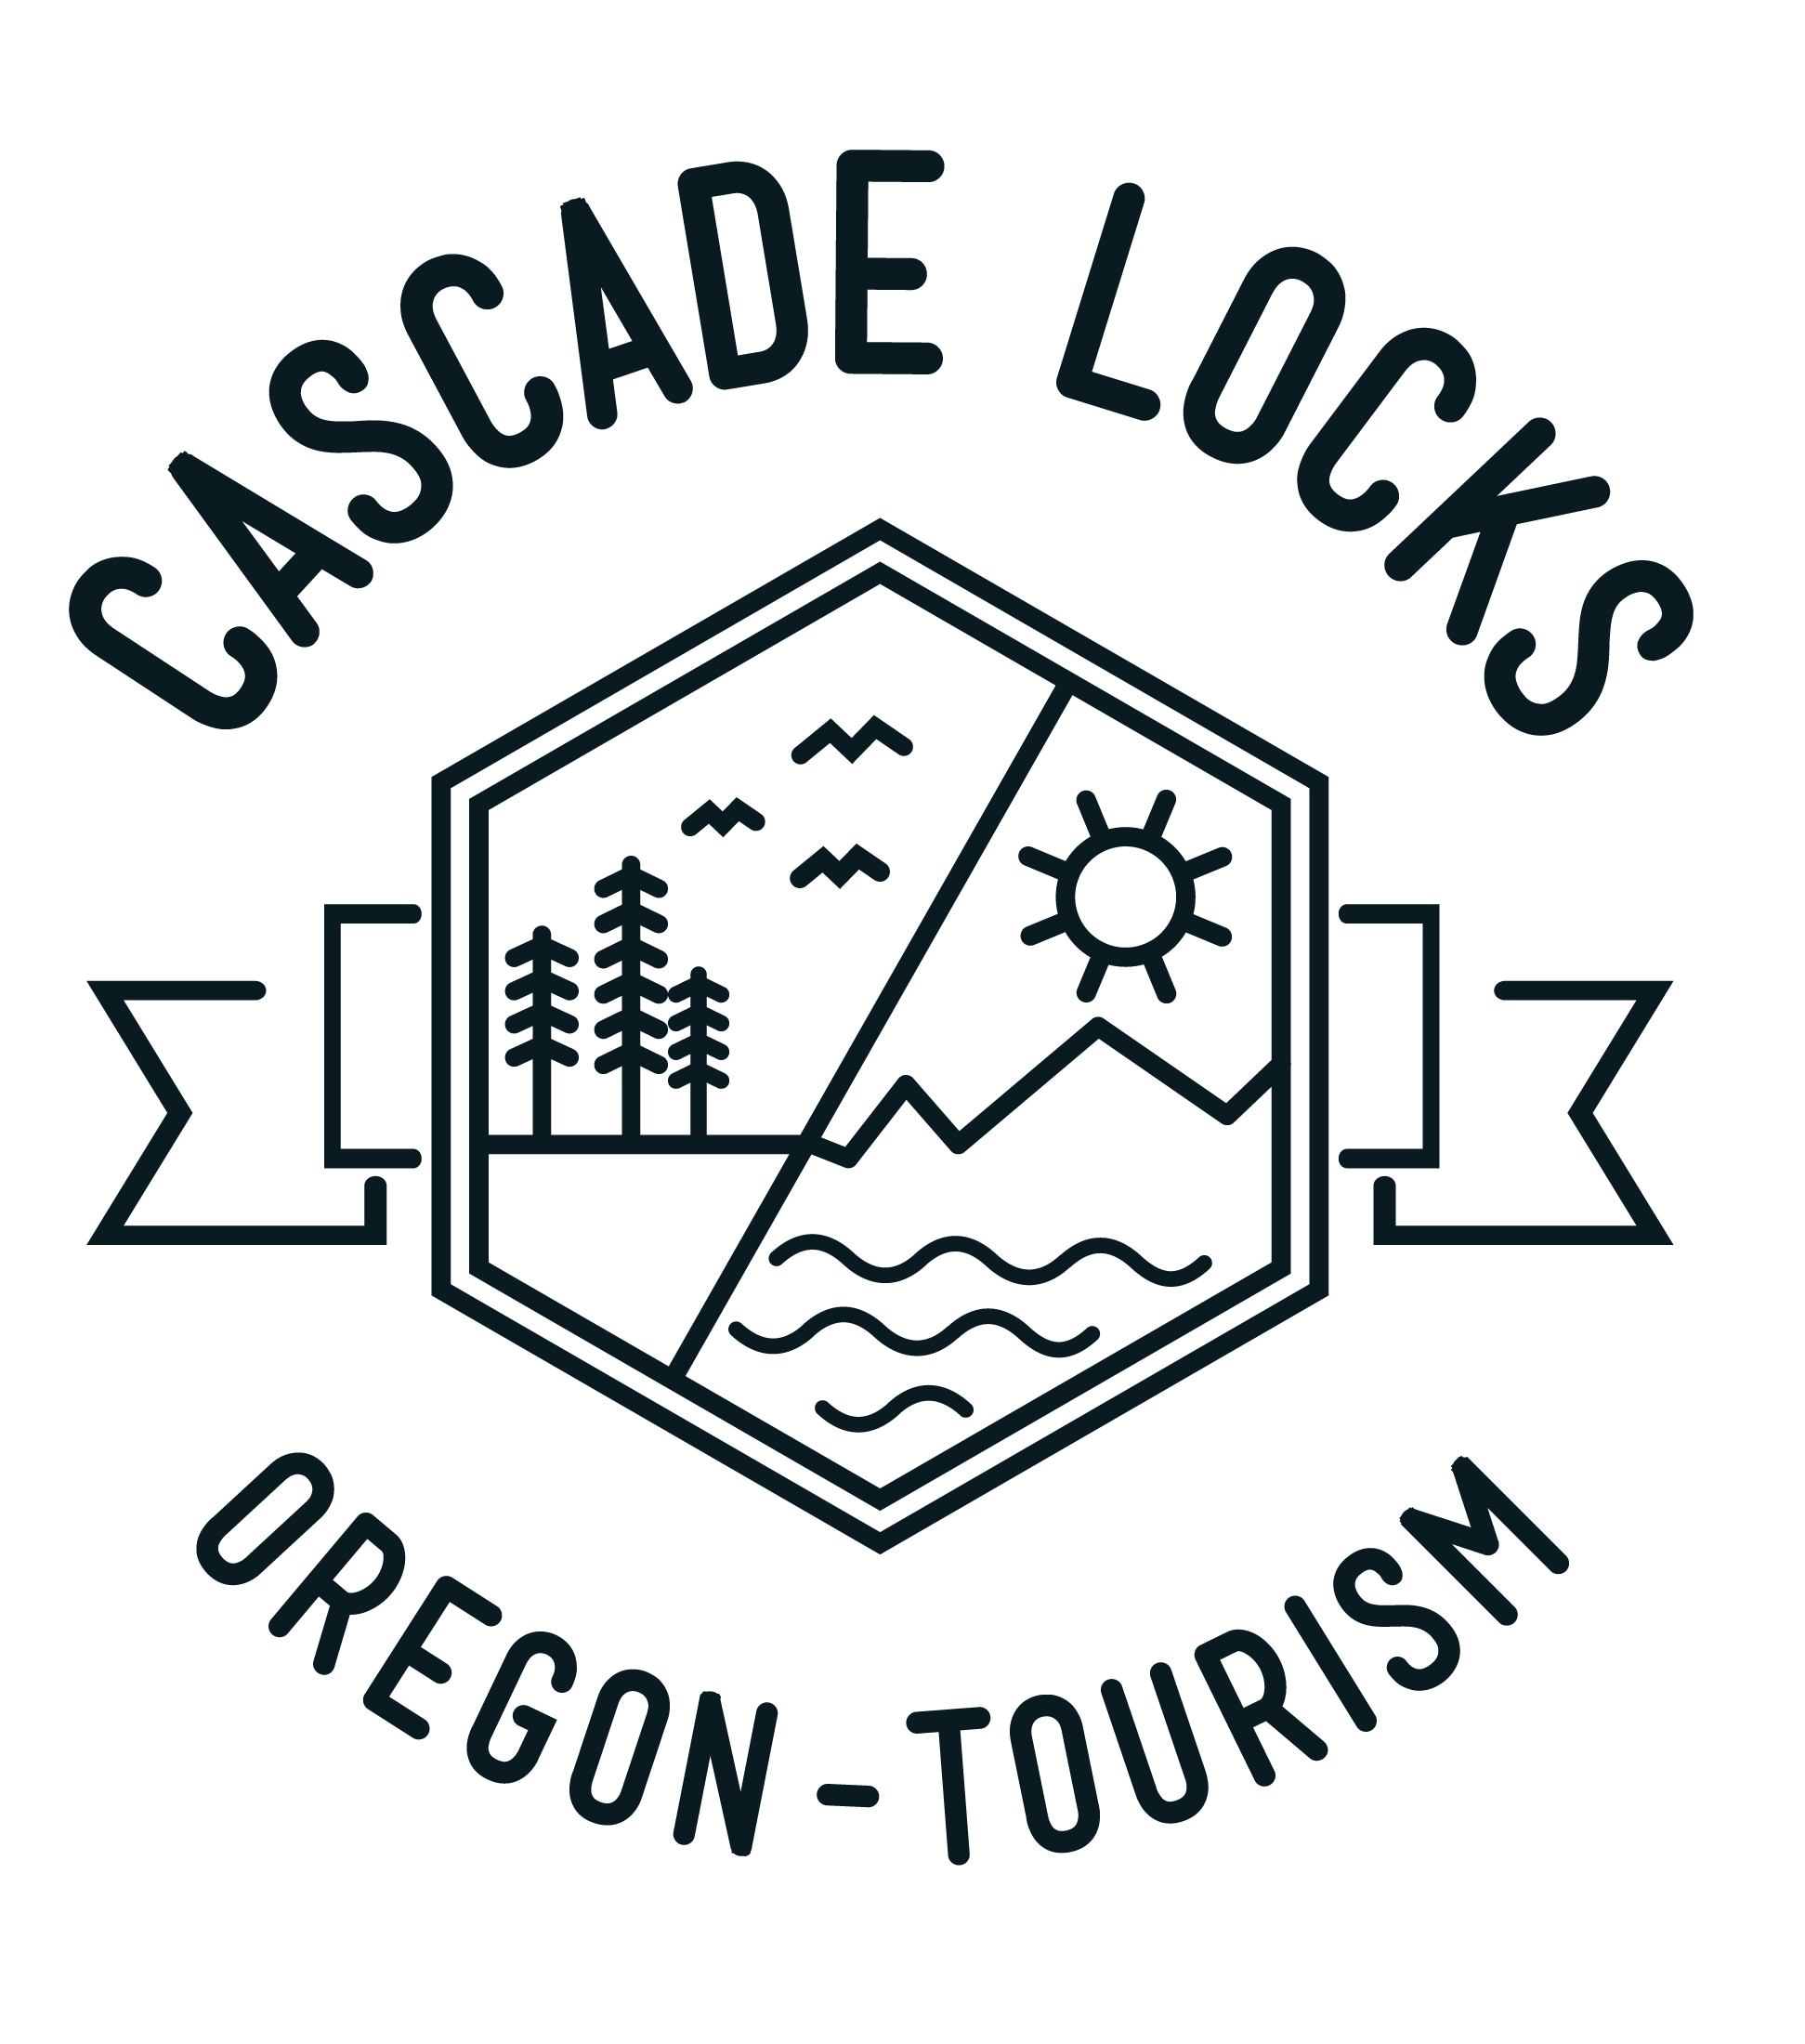  West Columbia Gorge Members: Cascade Locks Tourism Committee 